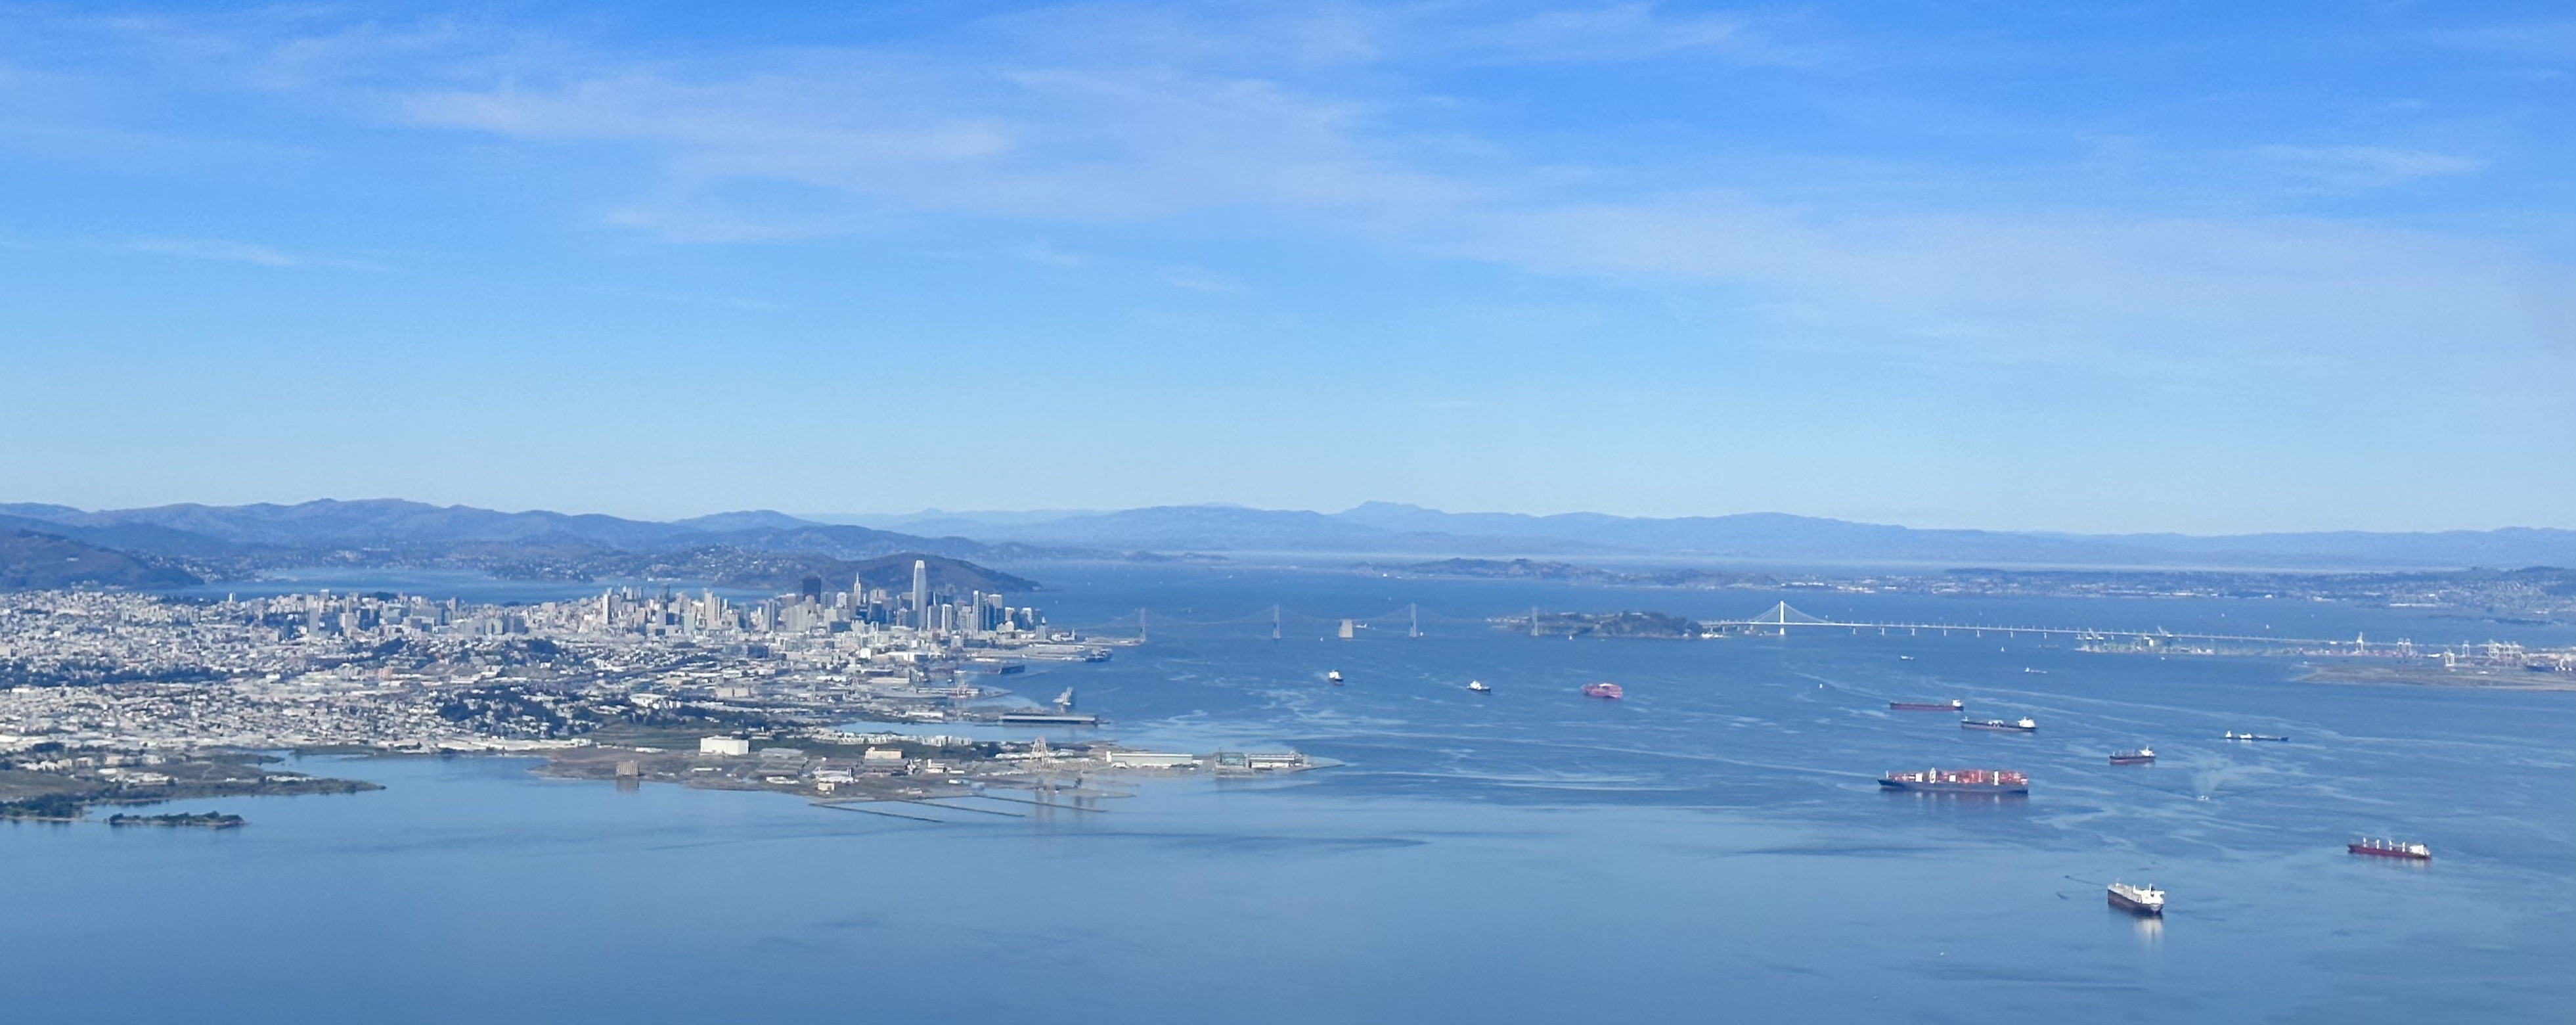 SF bay from above with container ships in motion